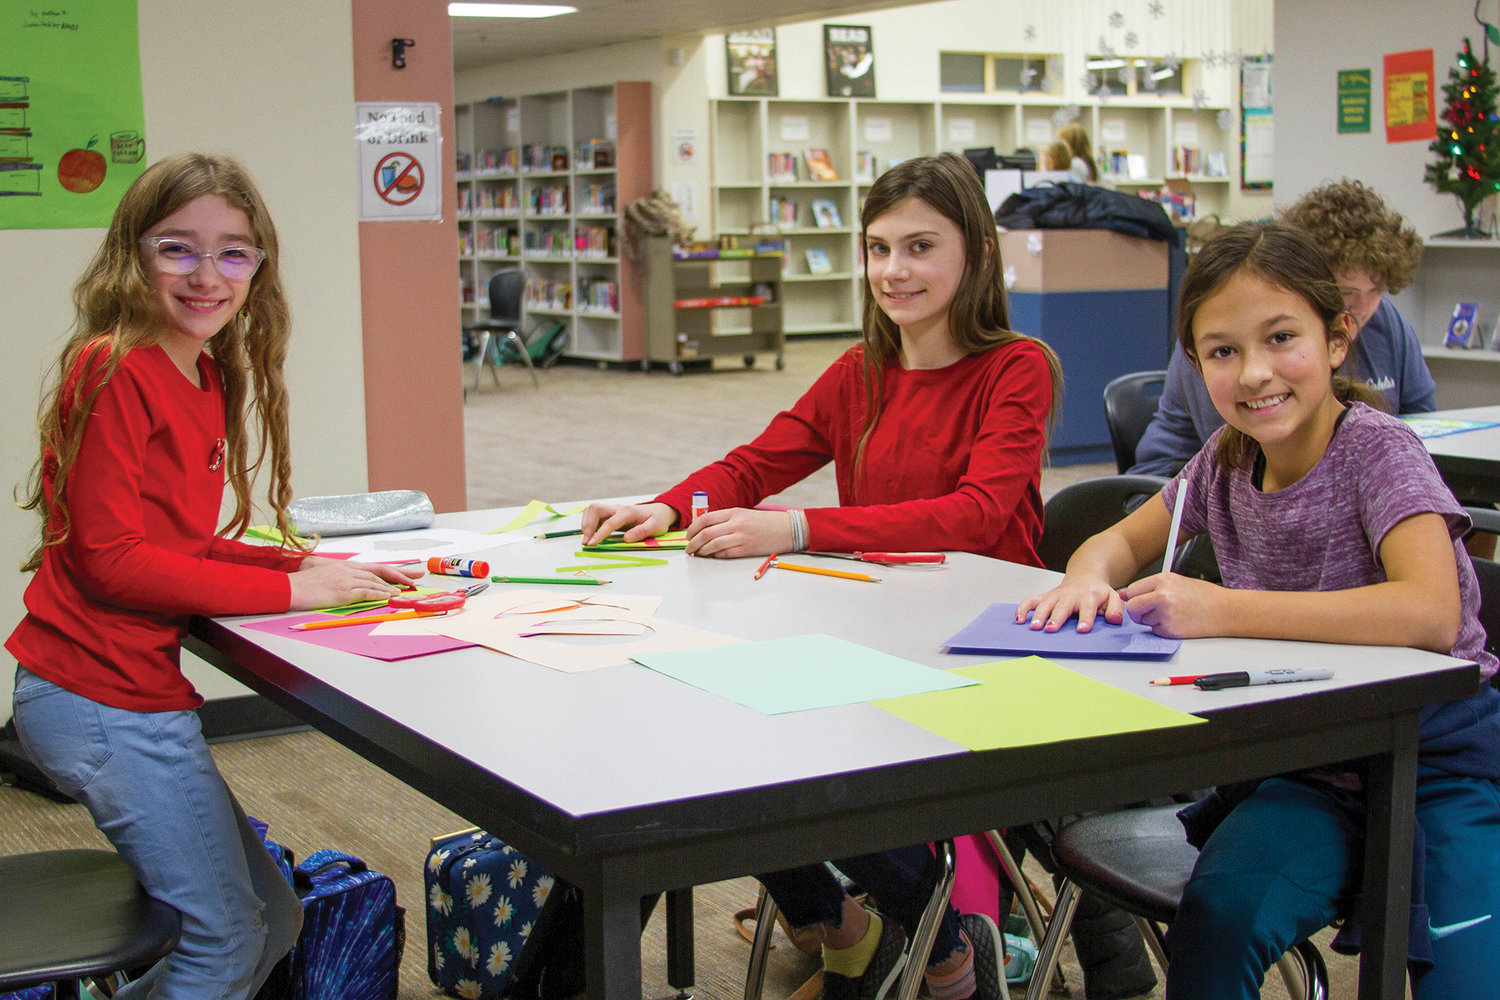 Woodland Middle School students take part in art and craft clubs, which were introduced in November.